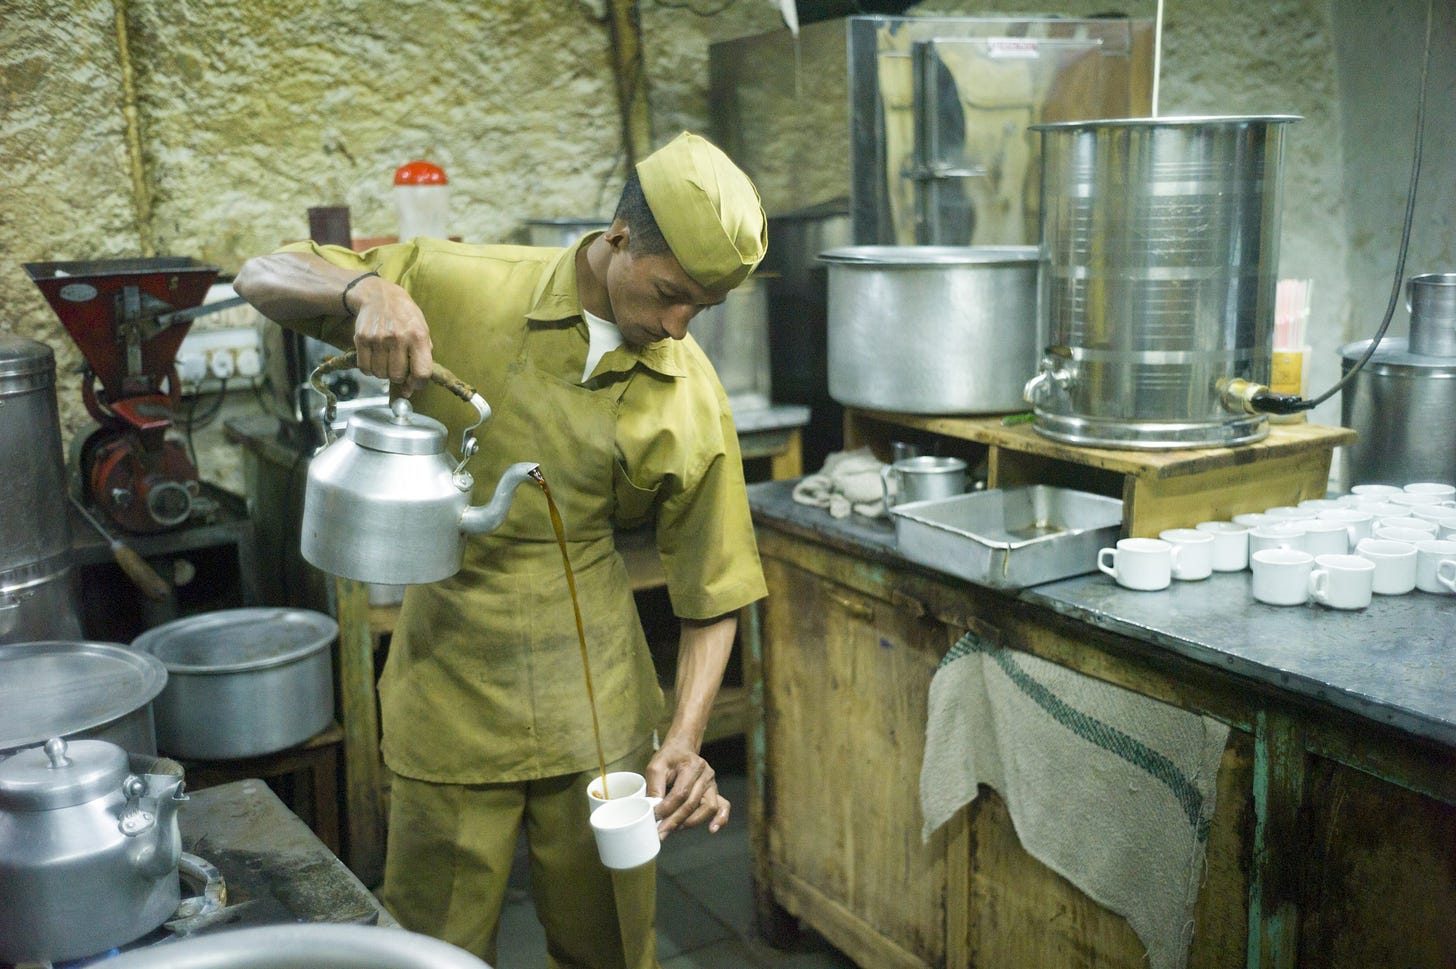 A worker pours coffee from a kettle into two cups in the kitchen of an Indian Coffee House location